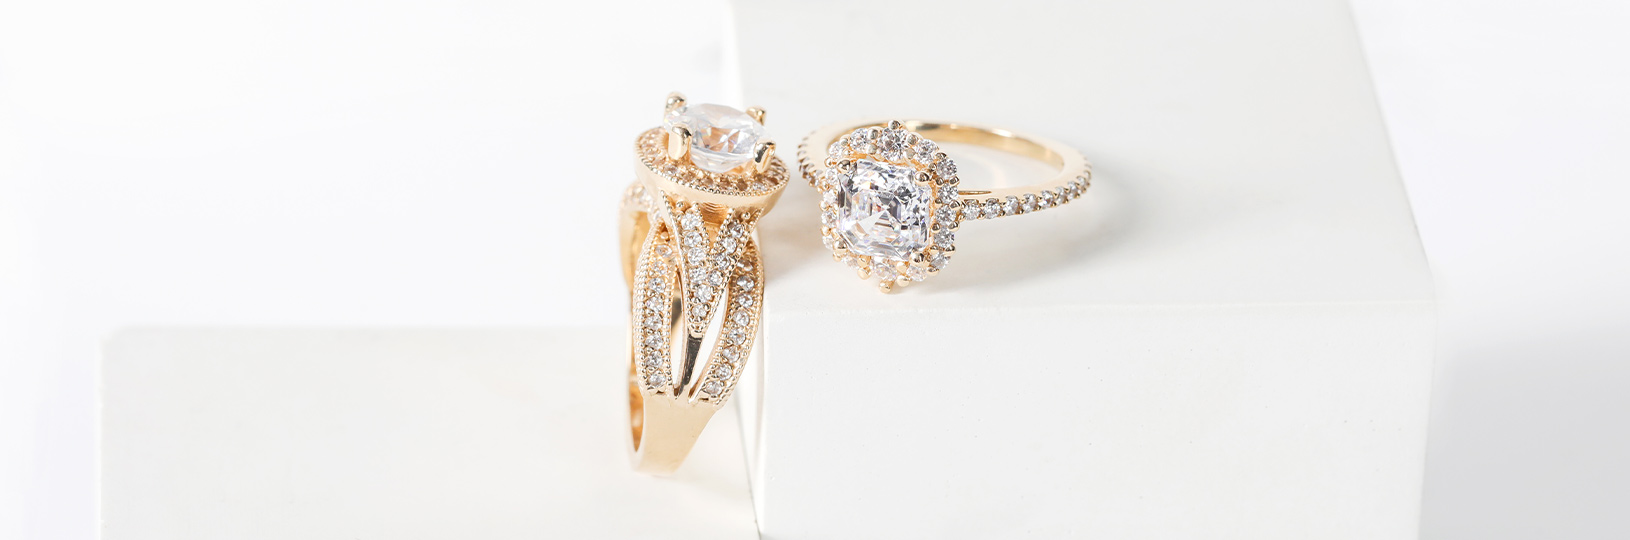 Two engagement rings side by side